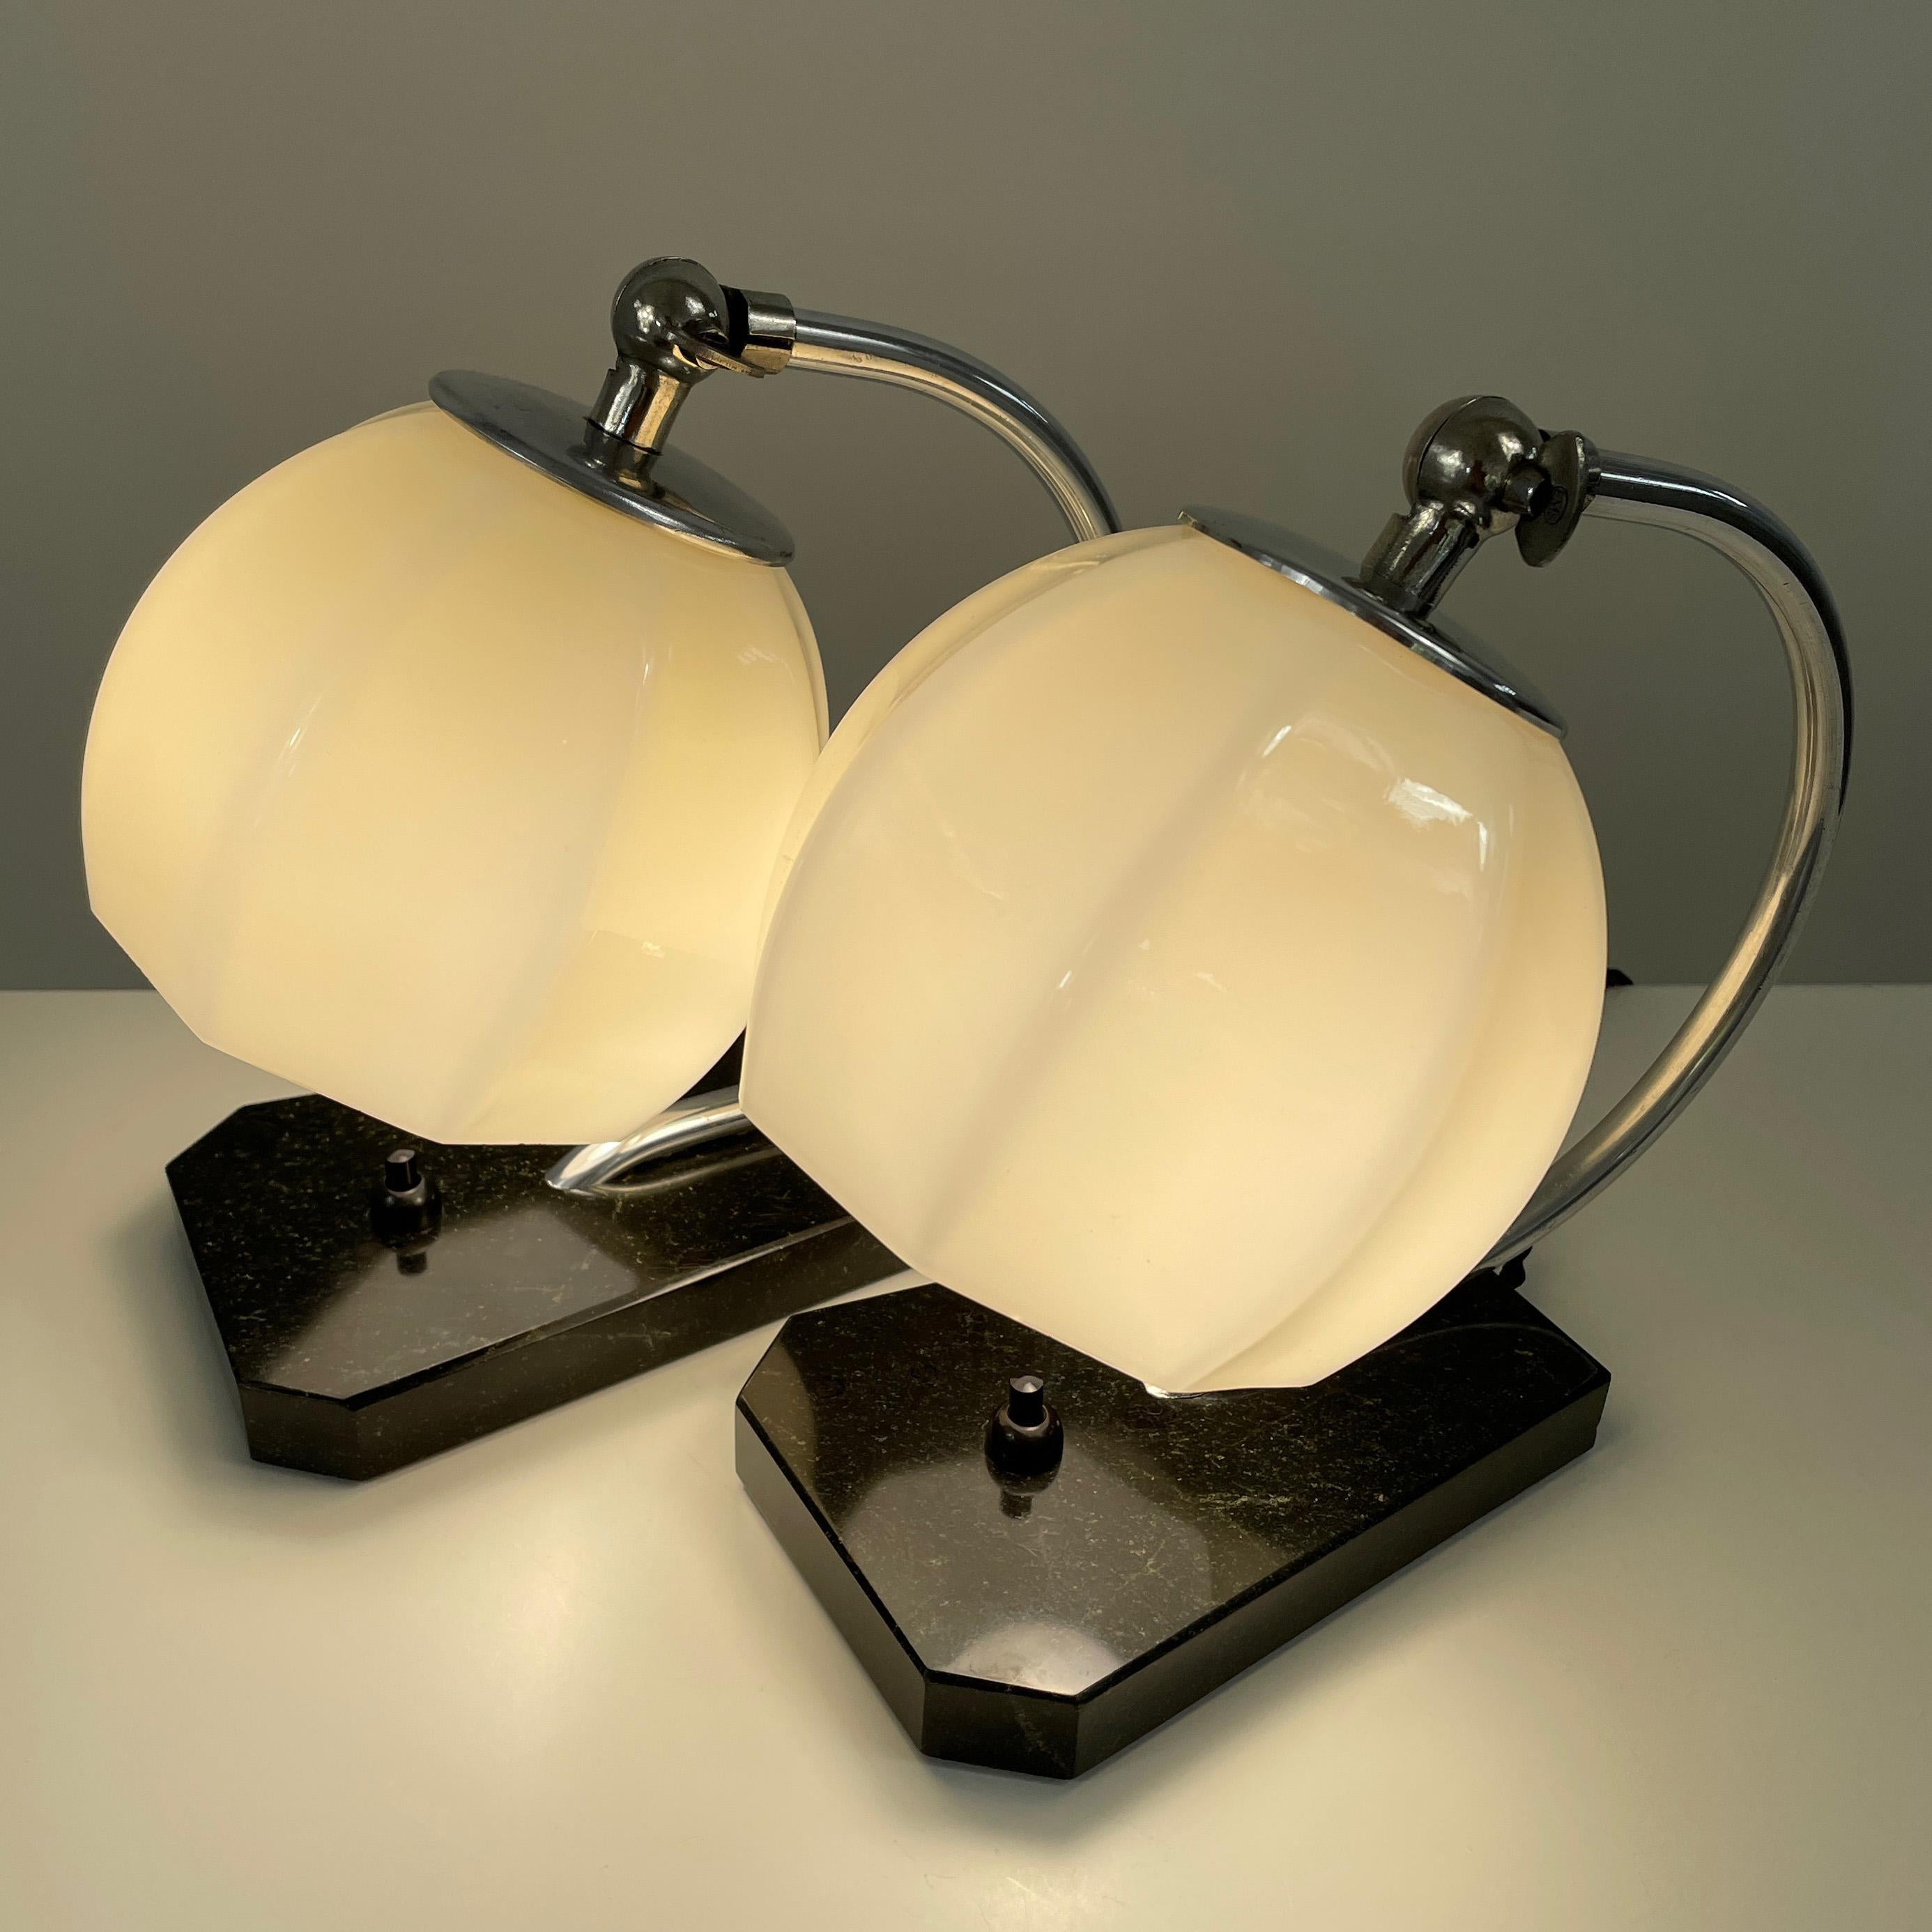 German Art Deco Opaline Glass, Marble and Aluminum Table Lamps, 1930s For Sale 8